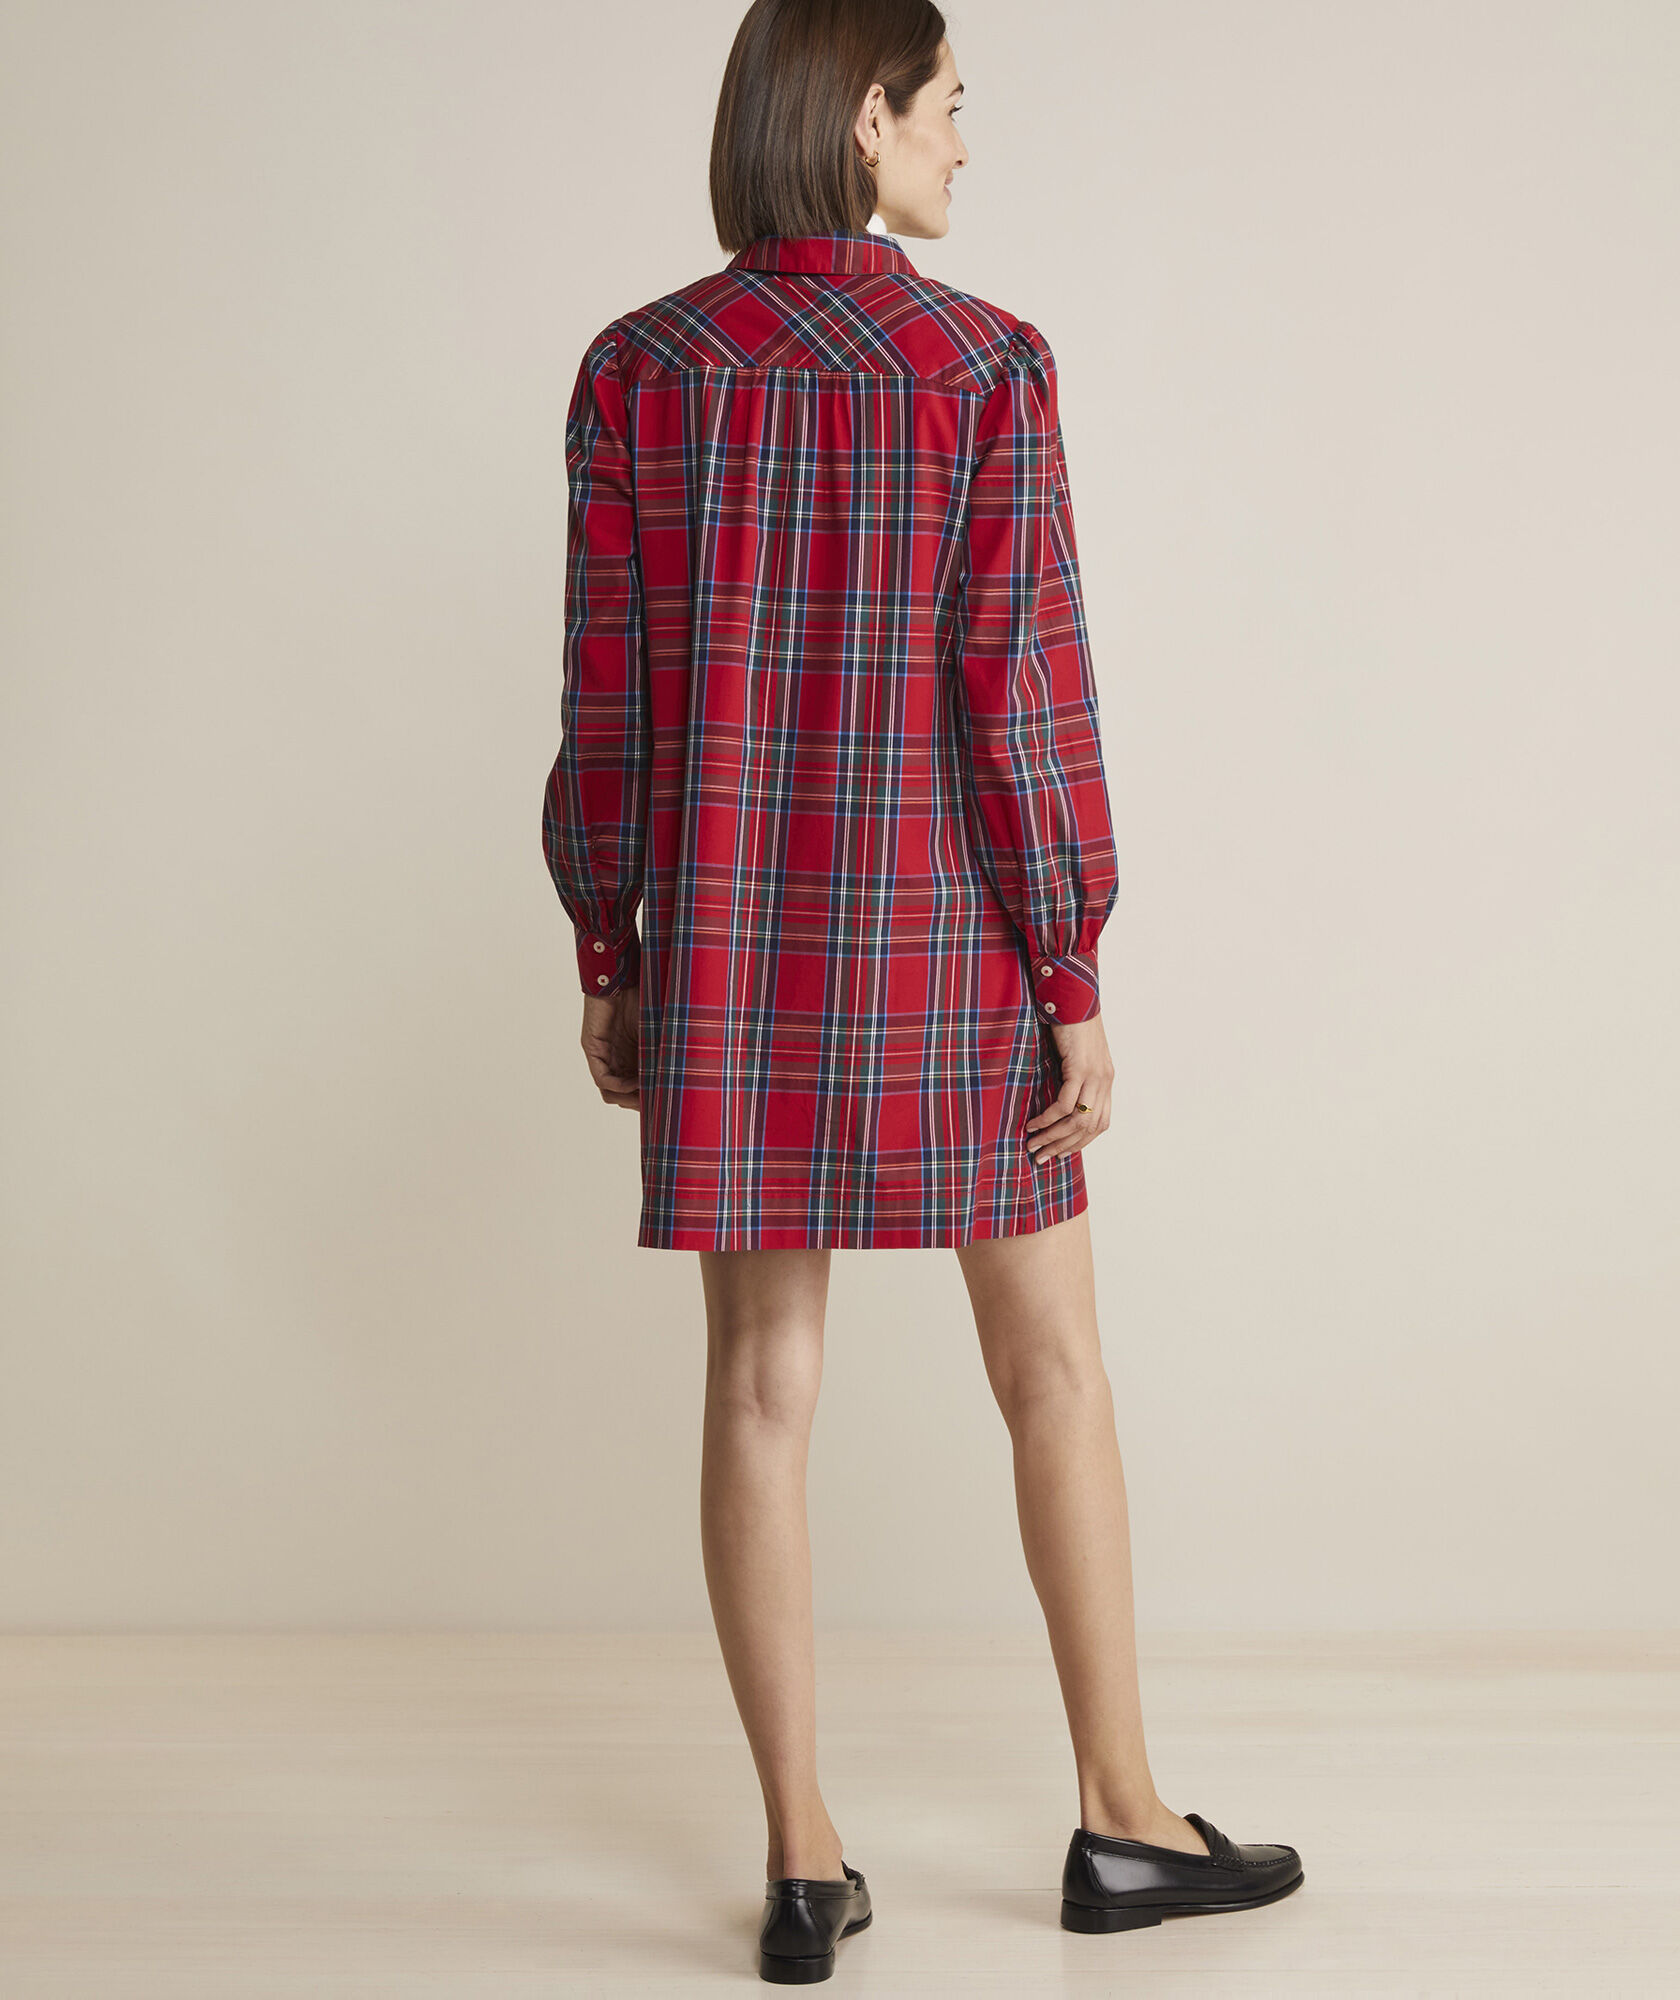 Missguided Square Check Shirt Dress White, $50 | Missguided | Lookastic